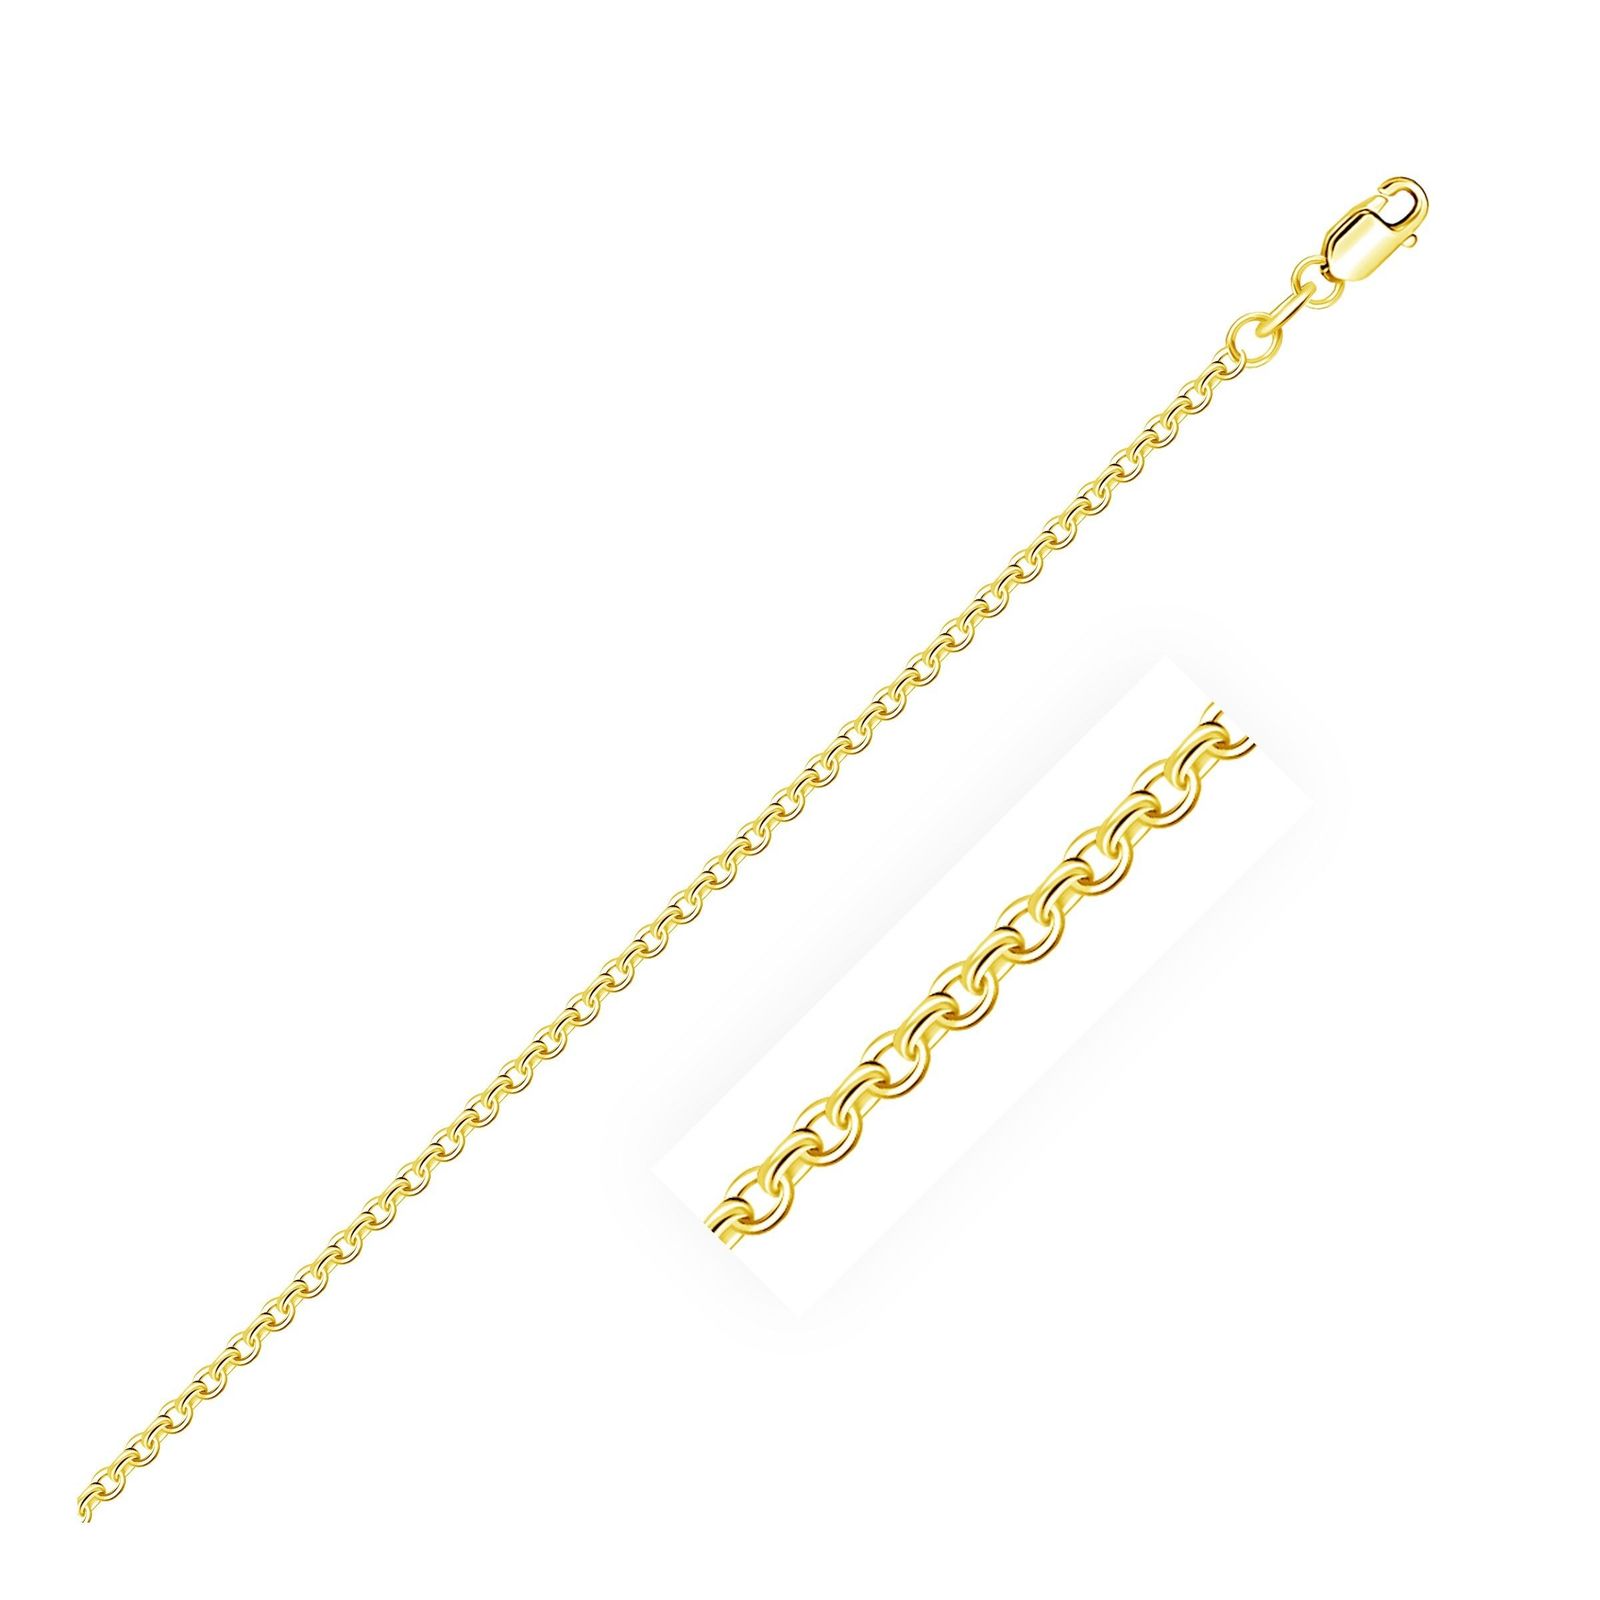 14k Yellow Gold Diamond Cut Cable Link Chain 1.8mm, size 22''